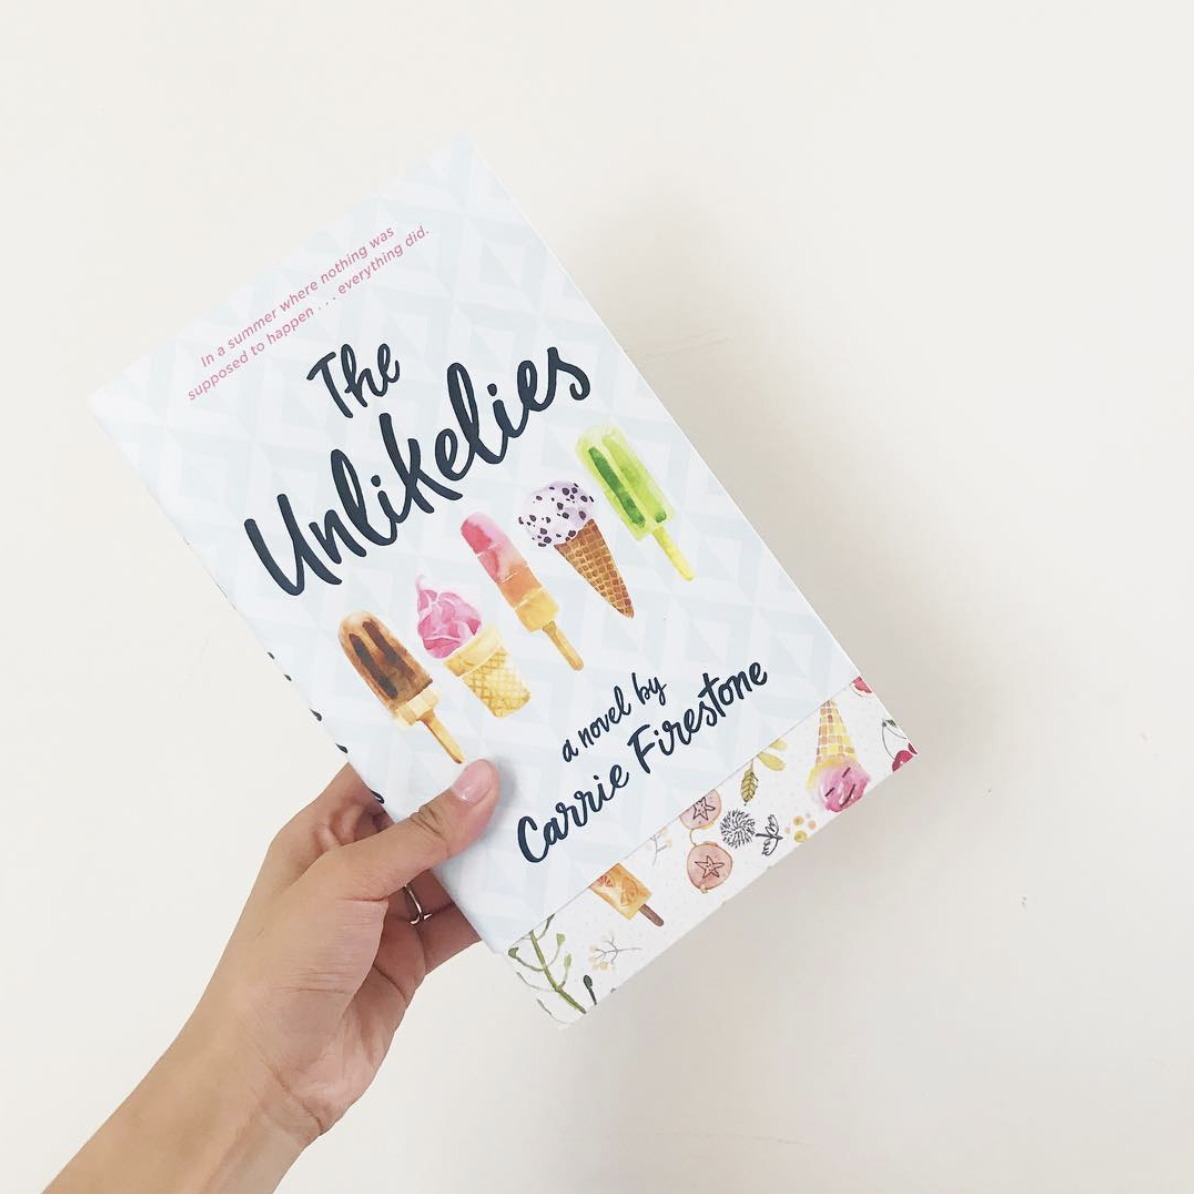 Instagram image of the book "The Unlikelies" by Carrie Firestone